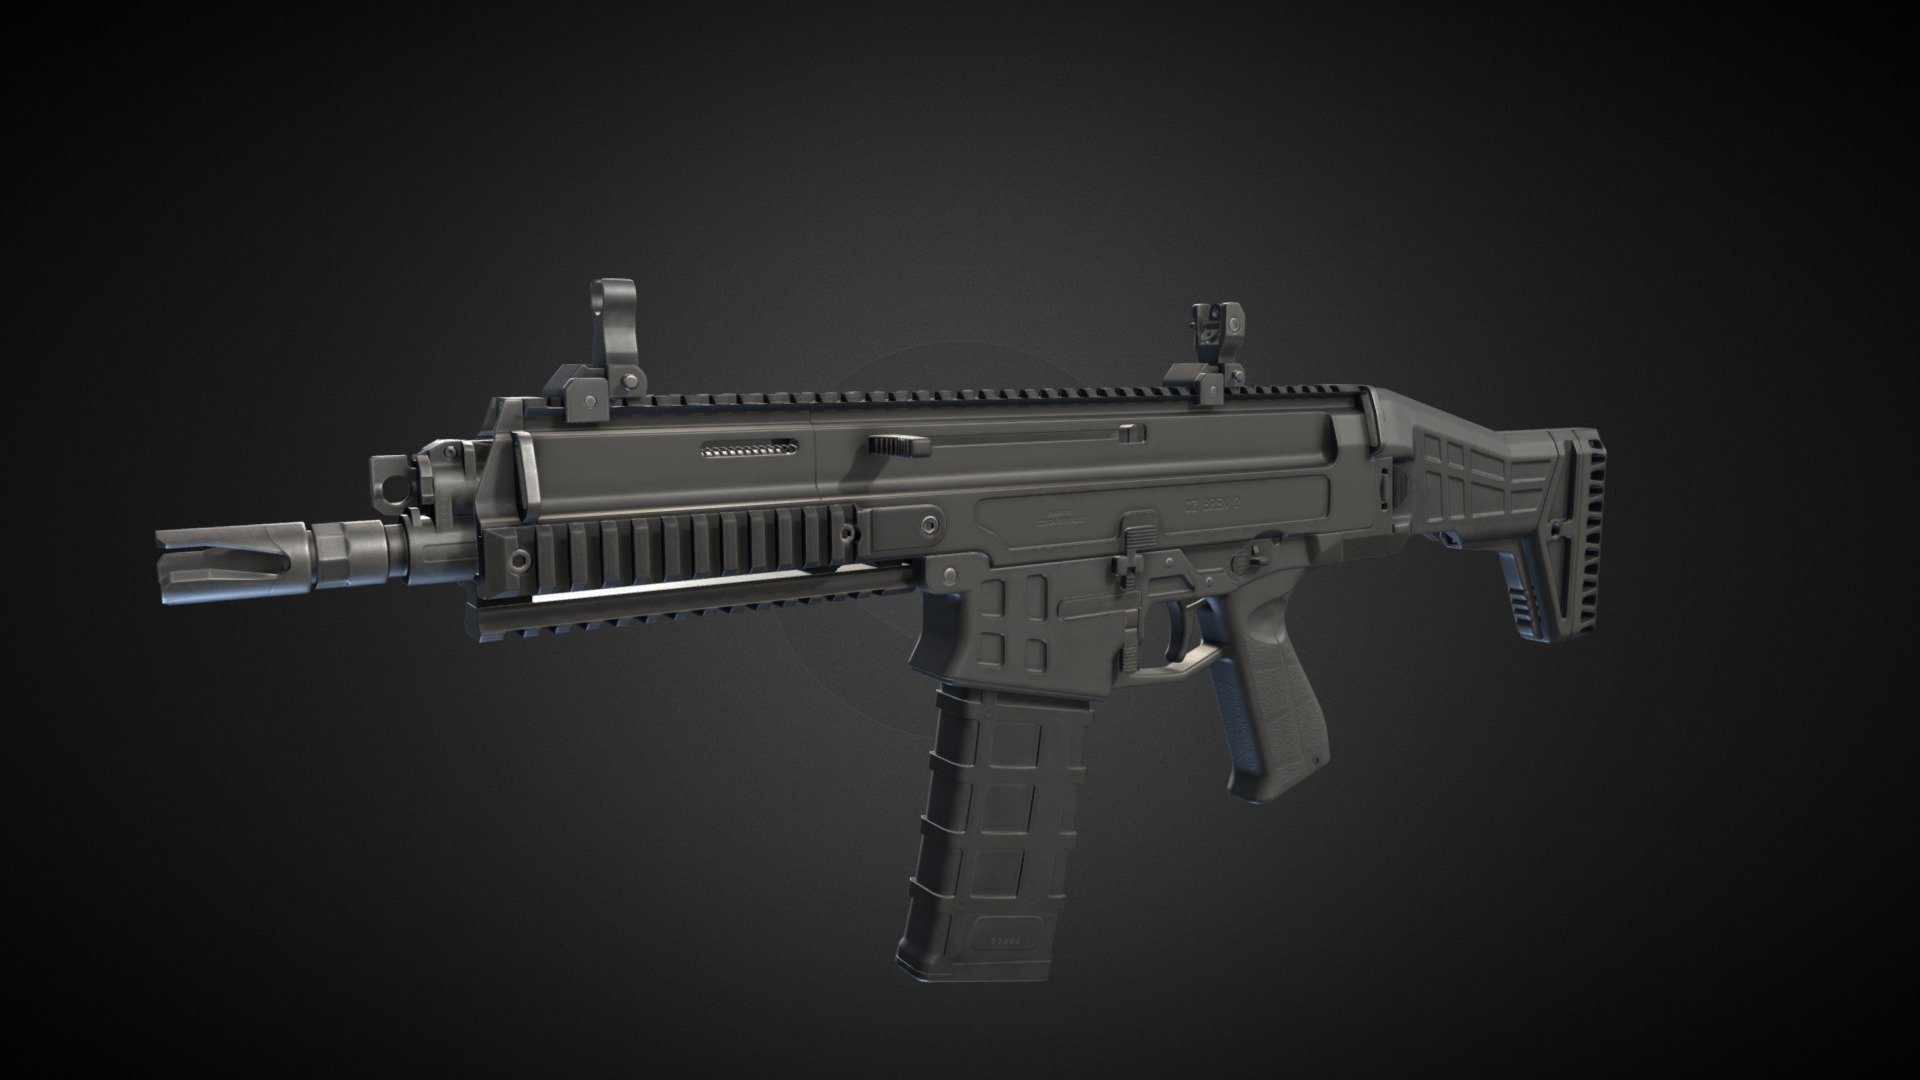 Czech SCAR cousin chambered in 5.56×45mm.   

Model is rigged, version with separated parts is also included. It have 6 PBR Materials in 4K. Black and FDE colors available. 

Verts: 21K

Tris: 40K  

Made in Blender 3d model